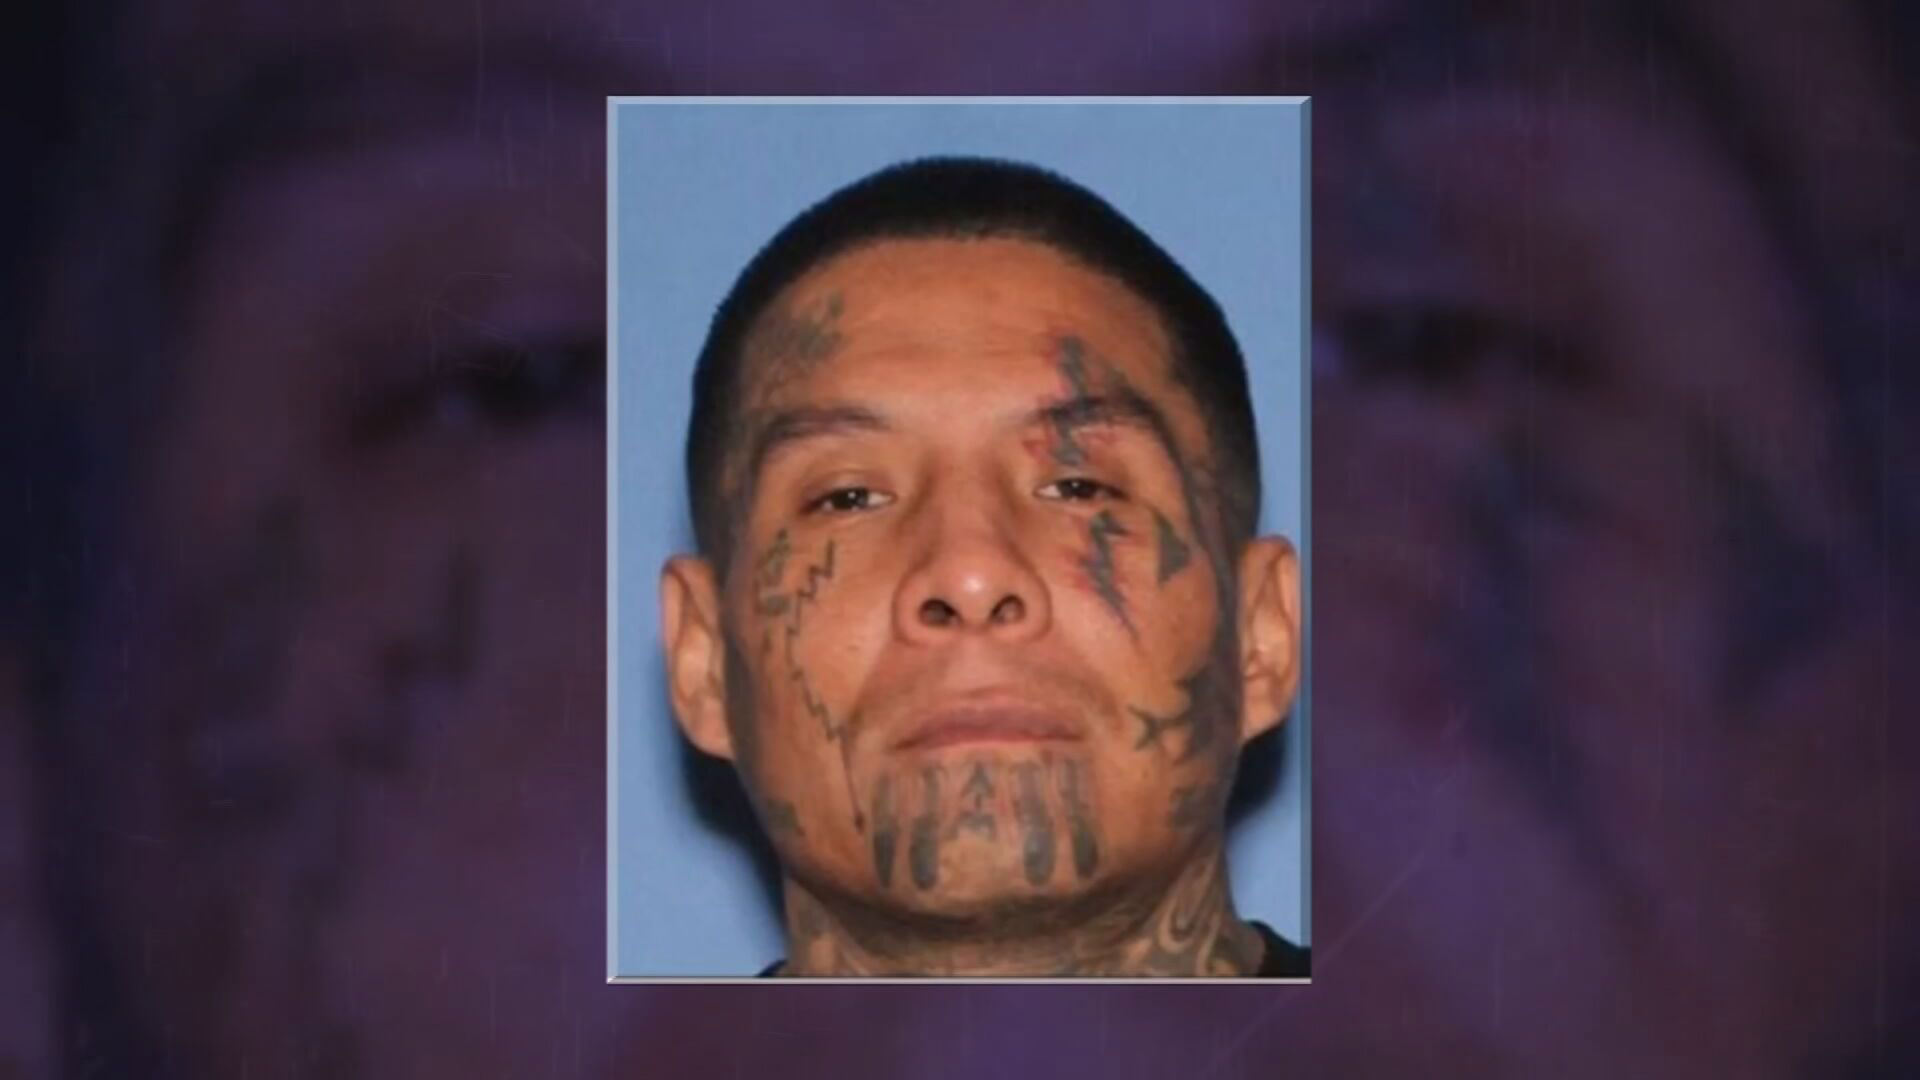 Suspect wanted for man’s murder caught at Flagstaff home